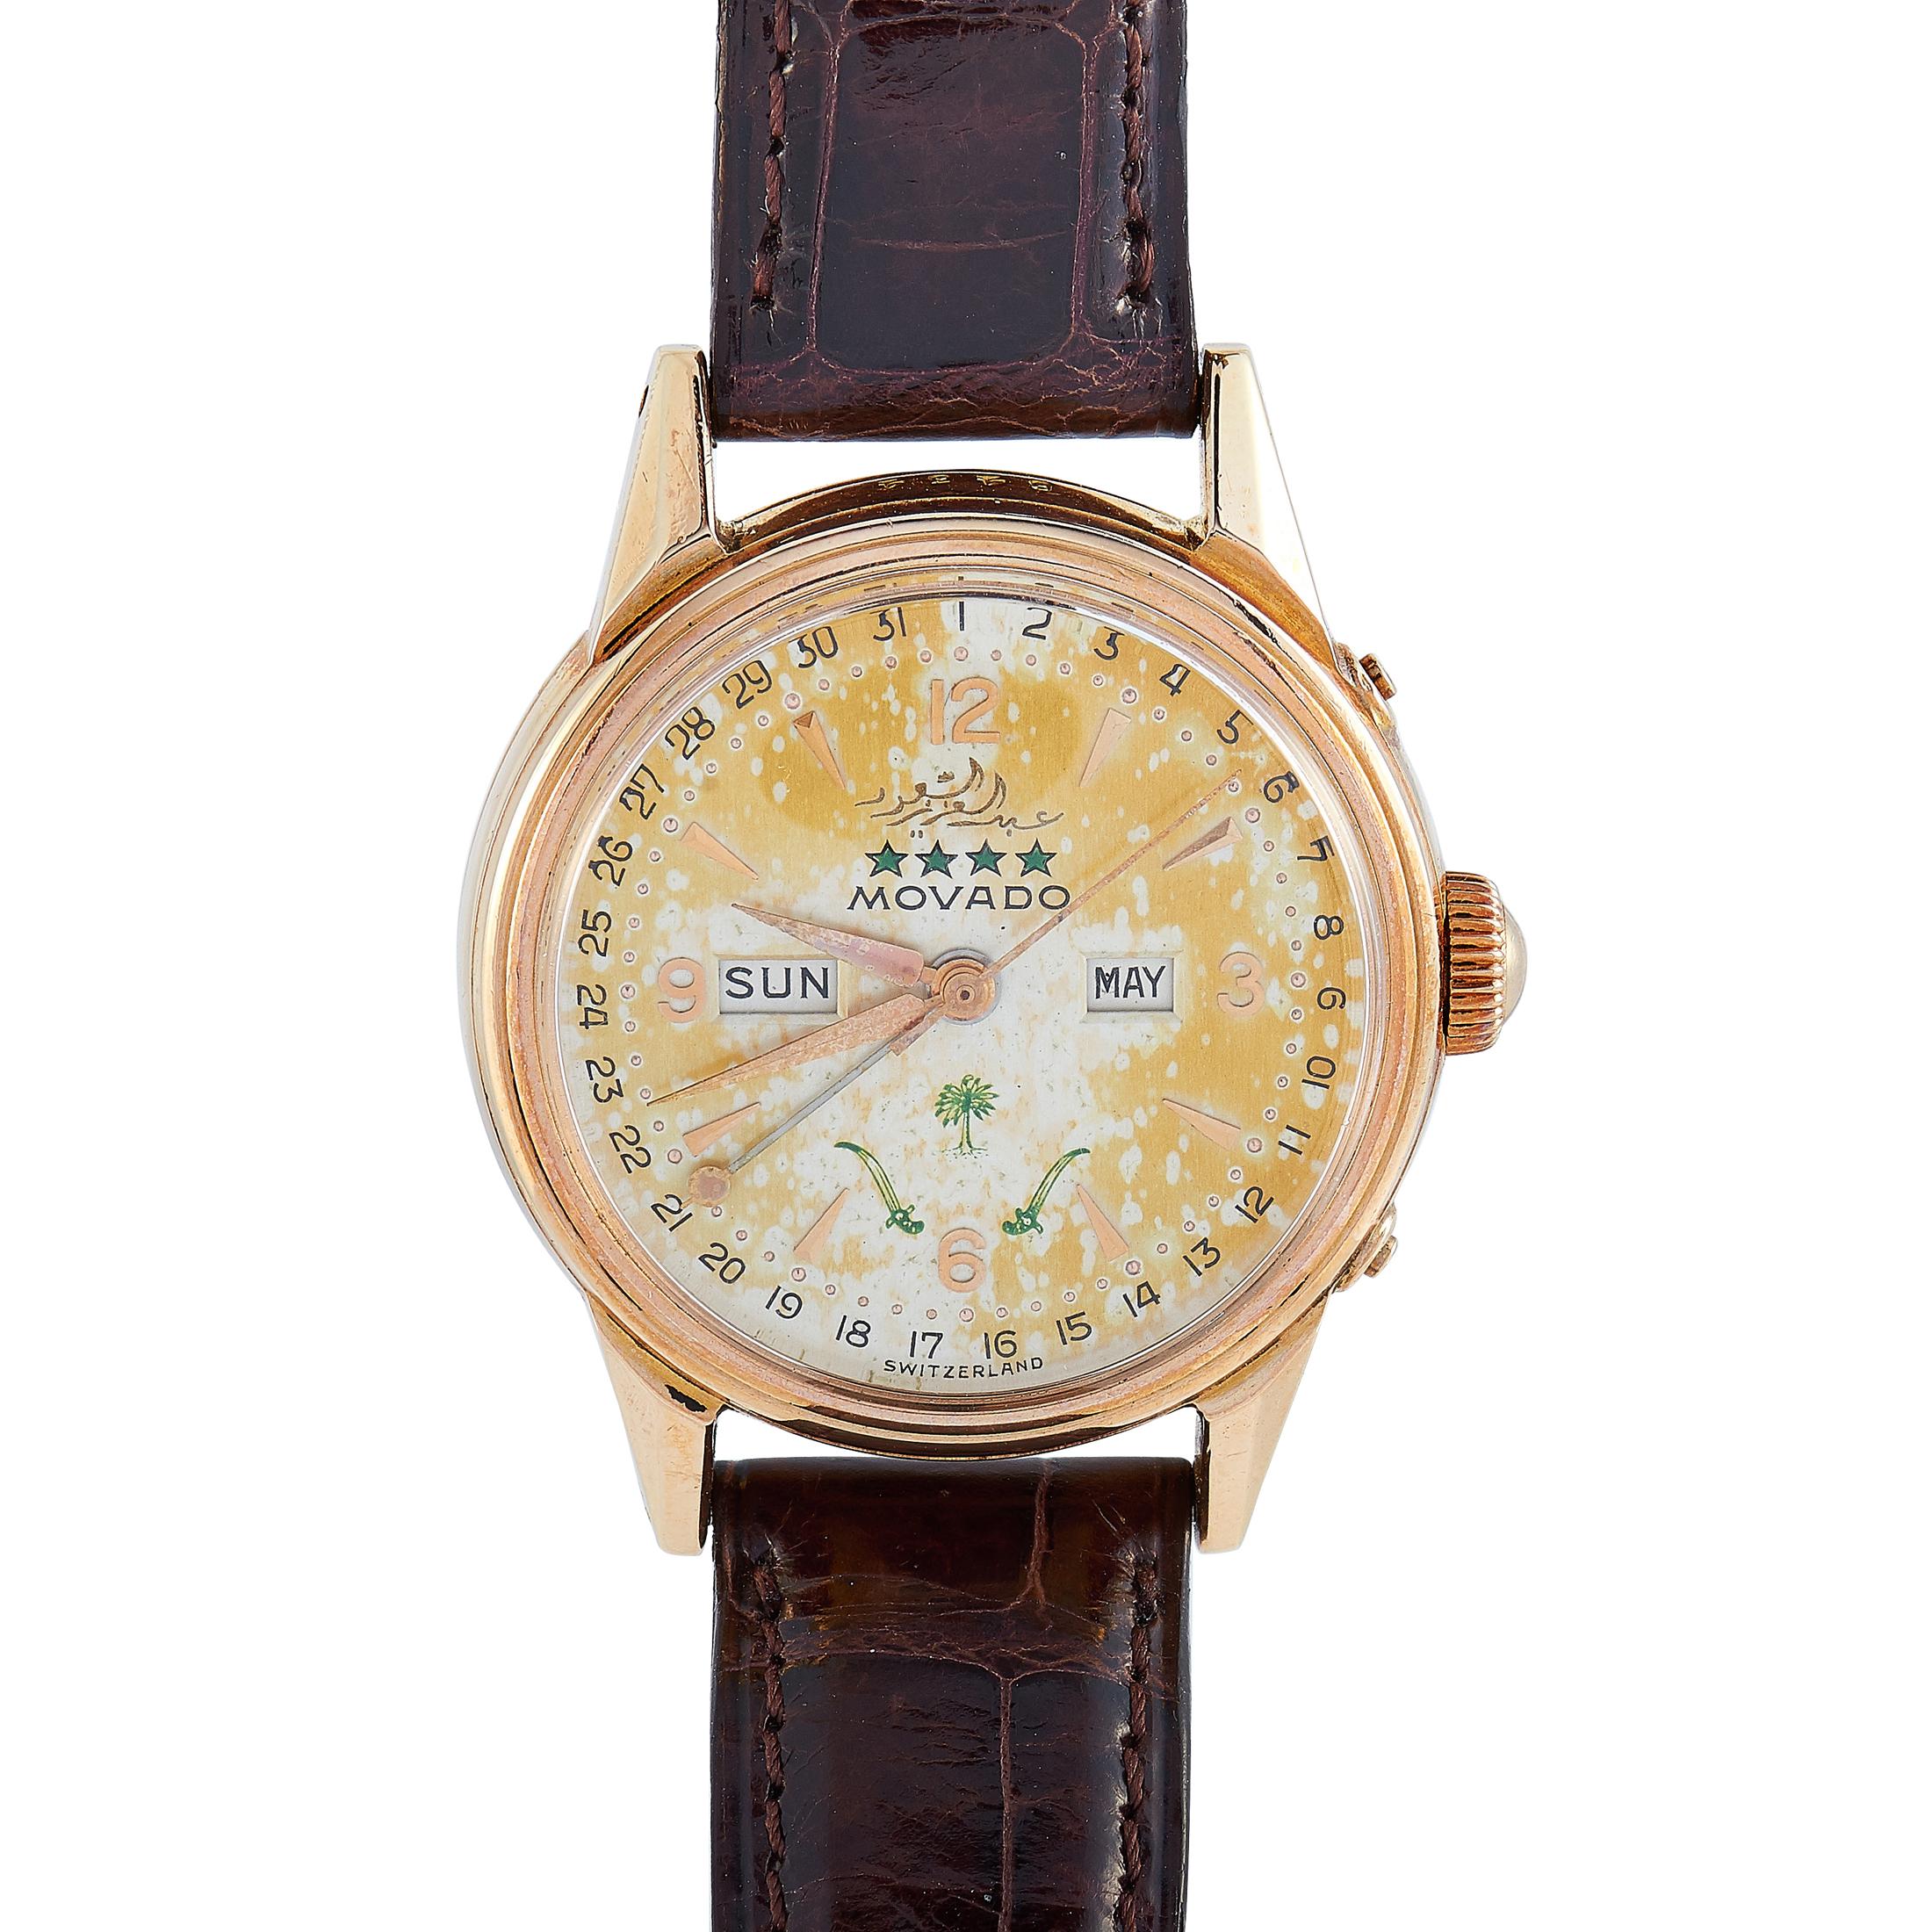 This vintage Movado Datomax timepiece from the 1950s boasts an 18K rose gold case that measures 32 mm in diameter. The case is presented on a brown leather strap fitted with a tang buckle. 
The original untouched silver dial is embellished in green